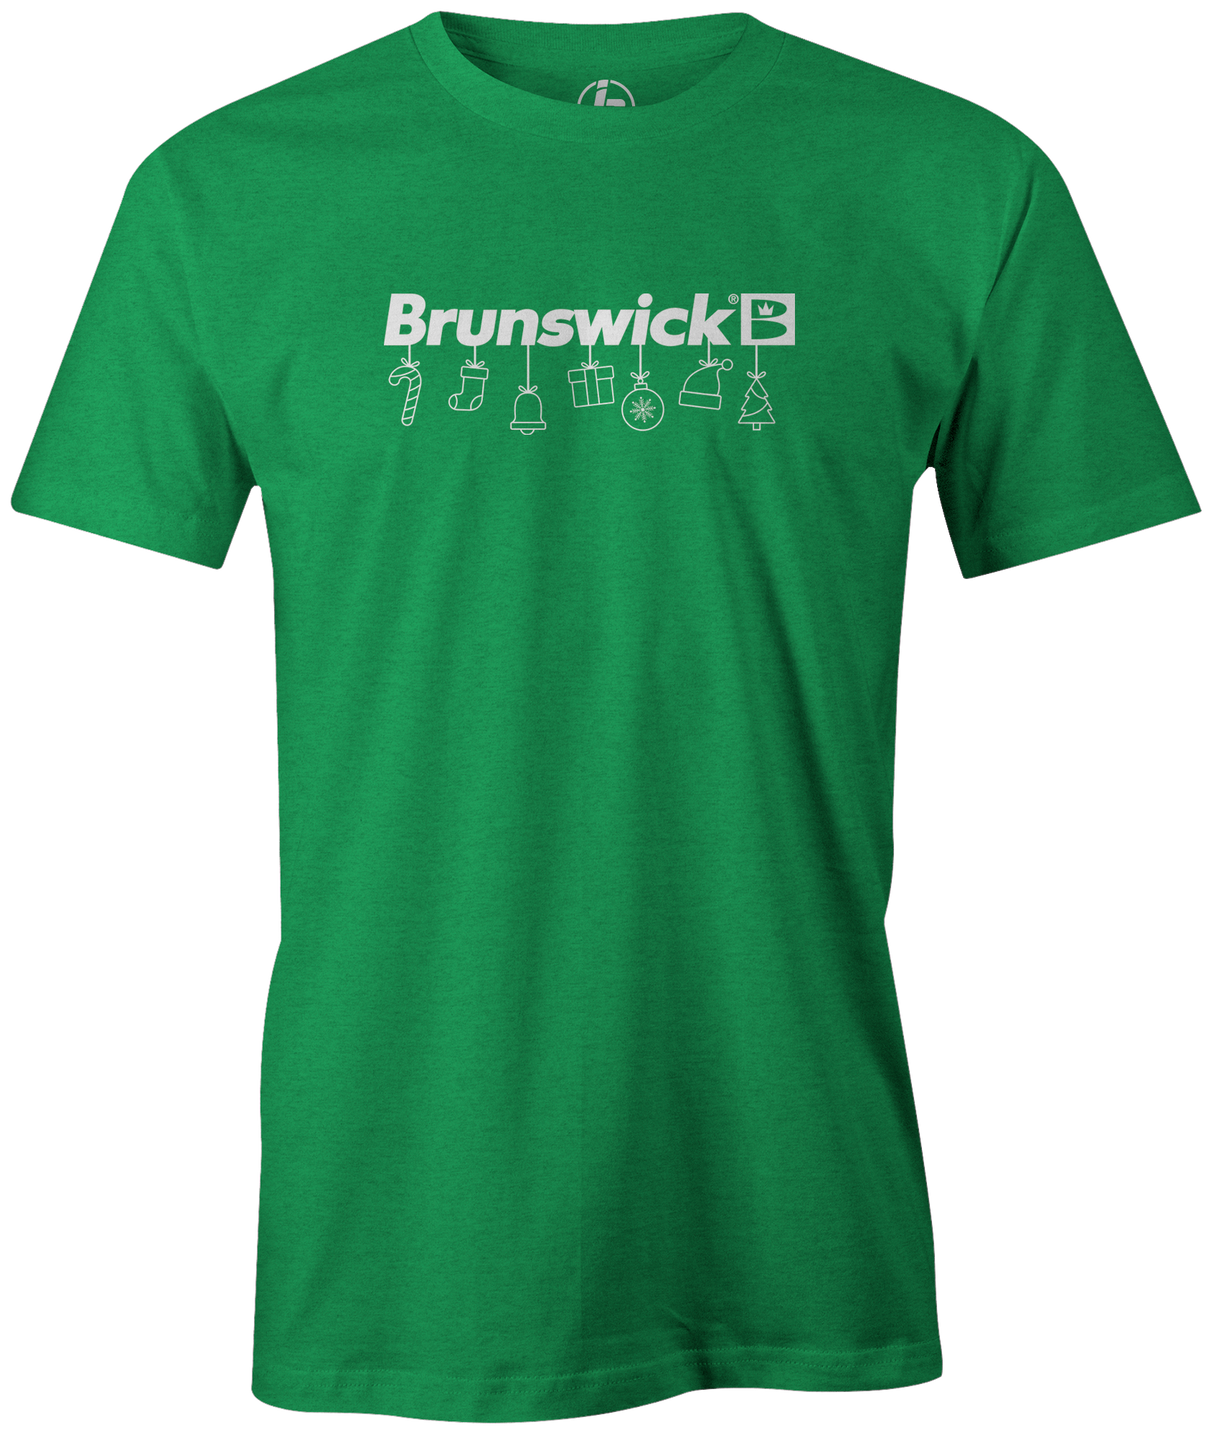 Tis' the season for Christmas bowling tee shirts. Show your Merriness on and off the lanes with the Brunswick bowling Holiday T-shirt!  ugly t-shirt comes in red and black colors. Show your holiday spirit with this shirt that helps you hook the ball at your office party or night out with your friends!  Bowling gift holiday gift guide. Tee-shirt gift. Christmas Tree